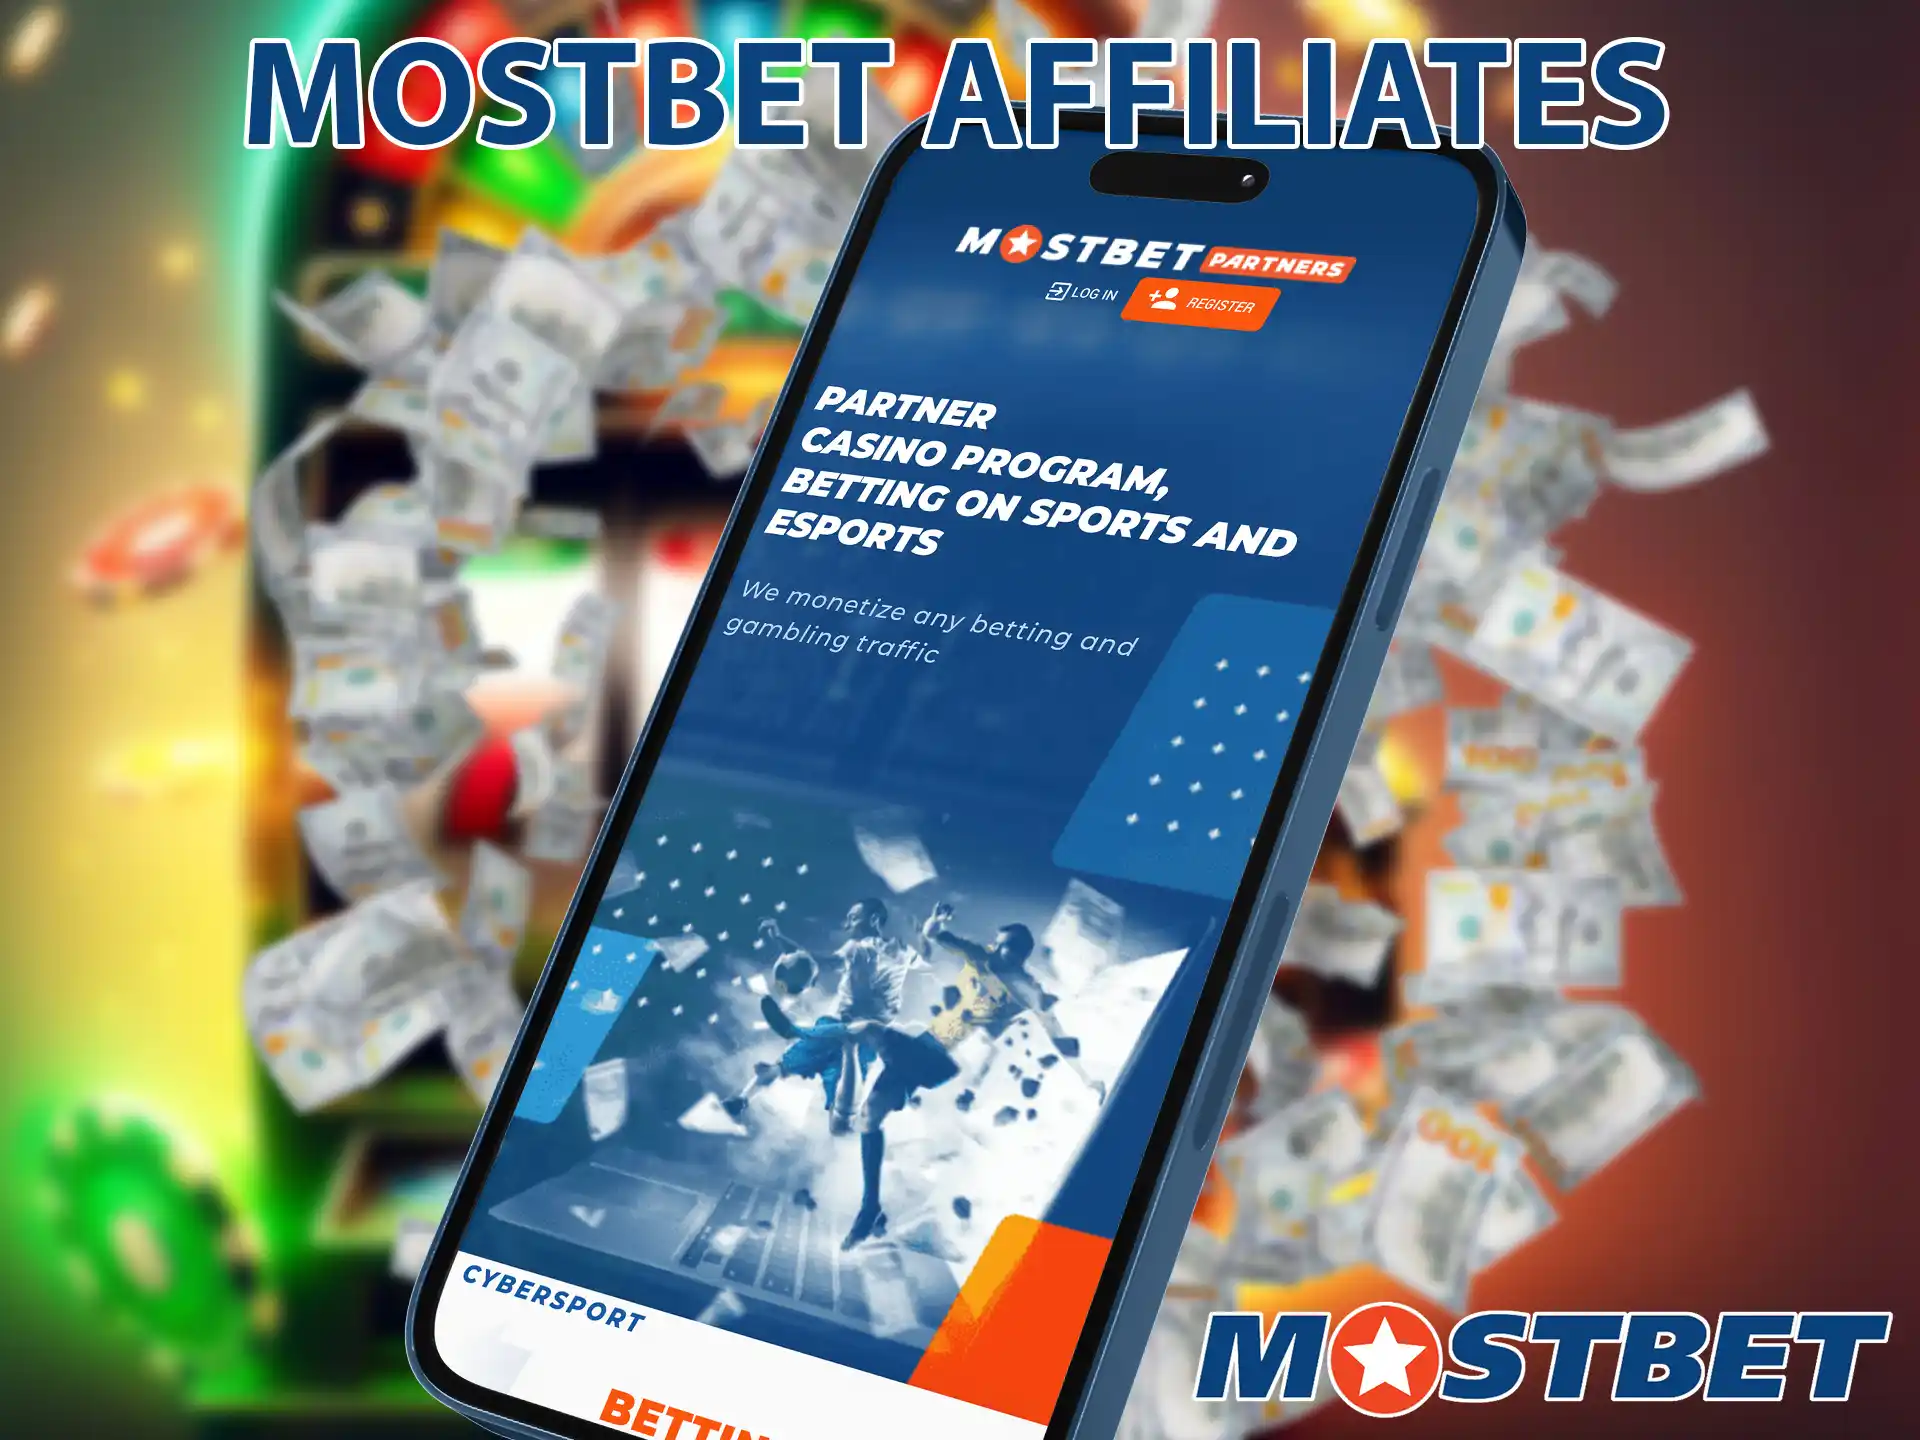 Bring new customers to Mostbet's website and earn extra money.